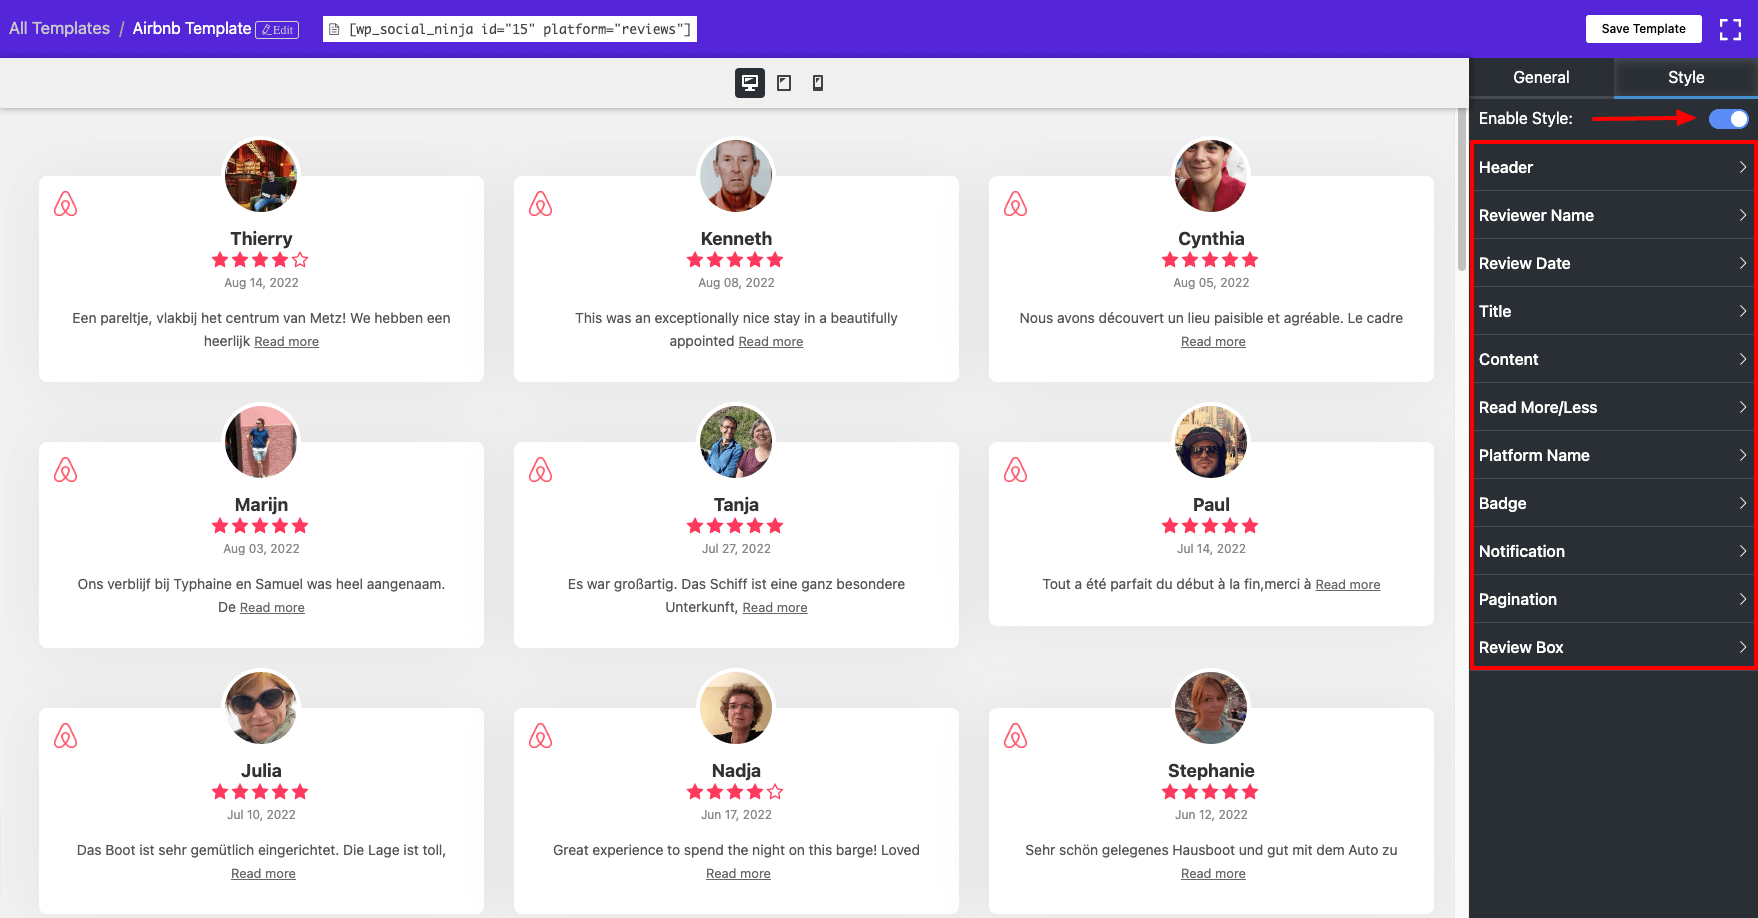 Enable website styling feature for social reviews